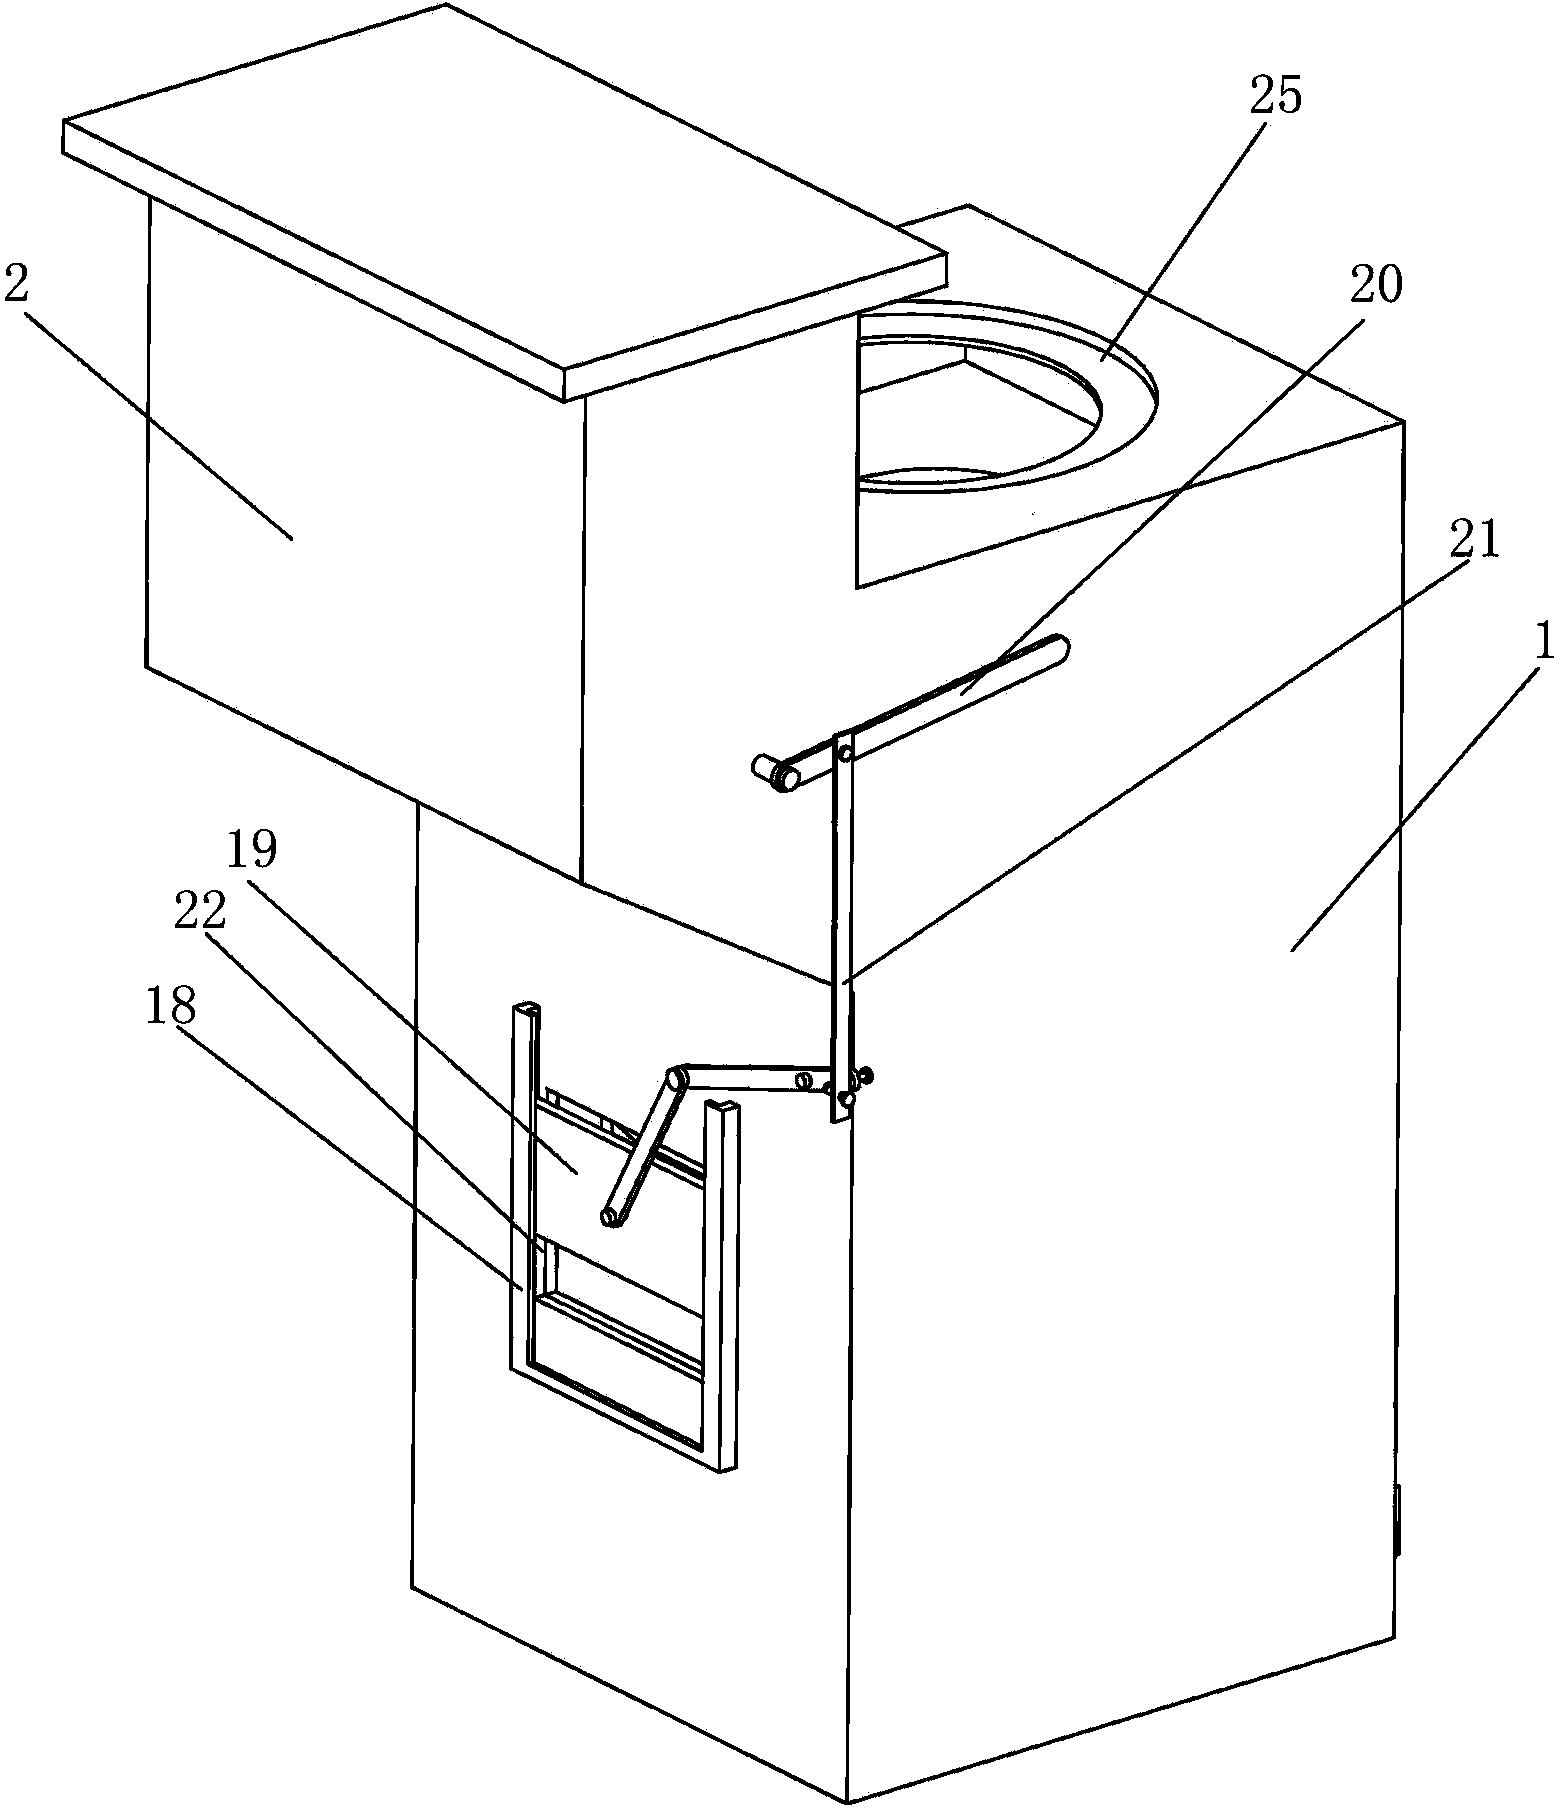 Multi-combustion type civil heating furnace integrating direct firing, return firing and gasified combustion